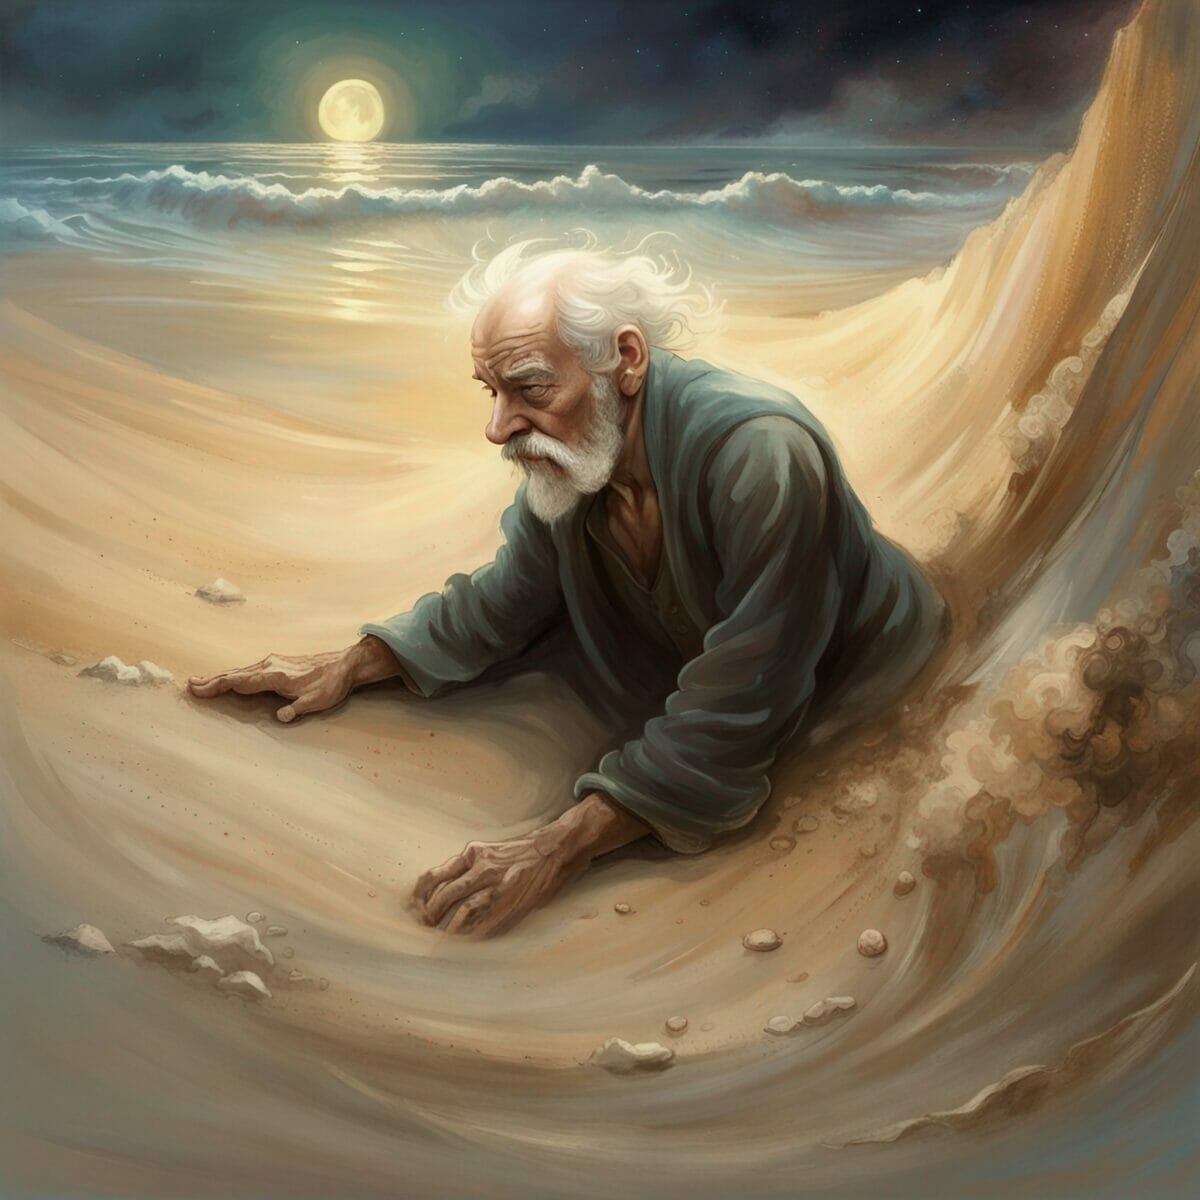 An old man sinking in the sand by the seashore.  Image 3 in the sands of time digital art collection by Doug Vos.